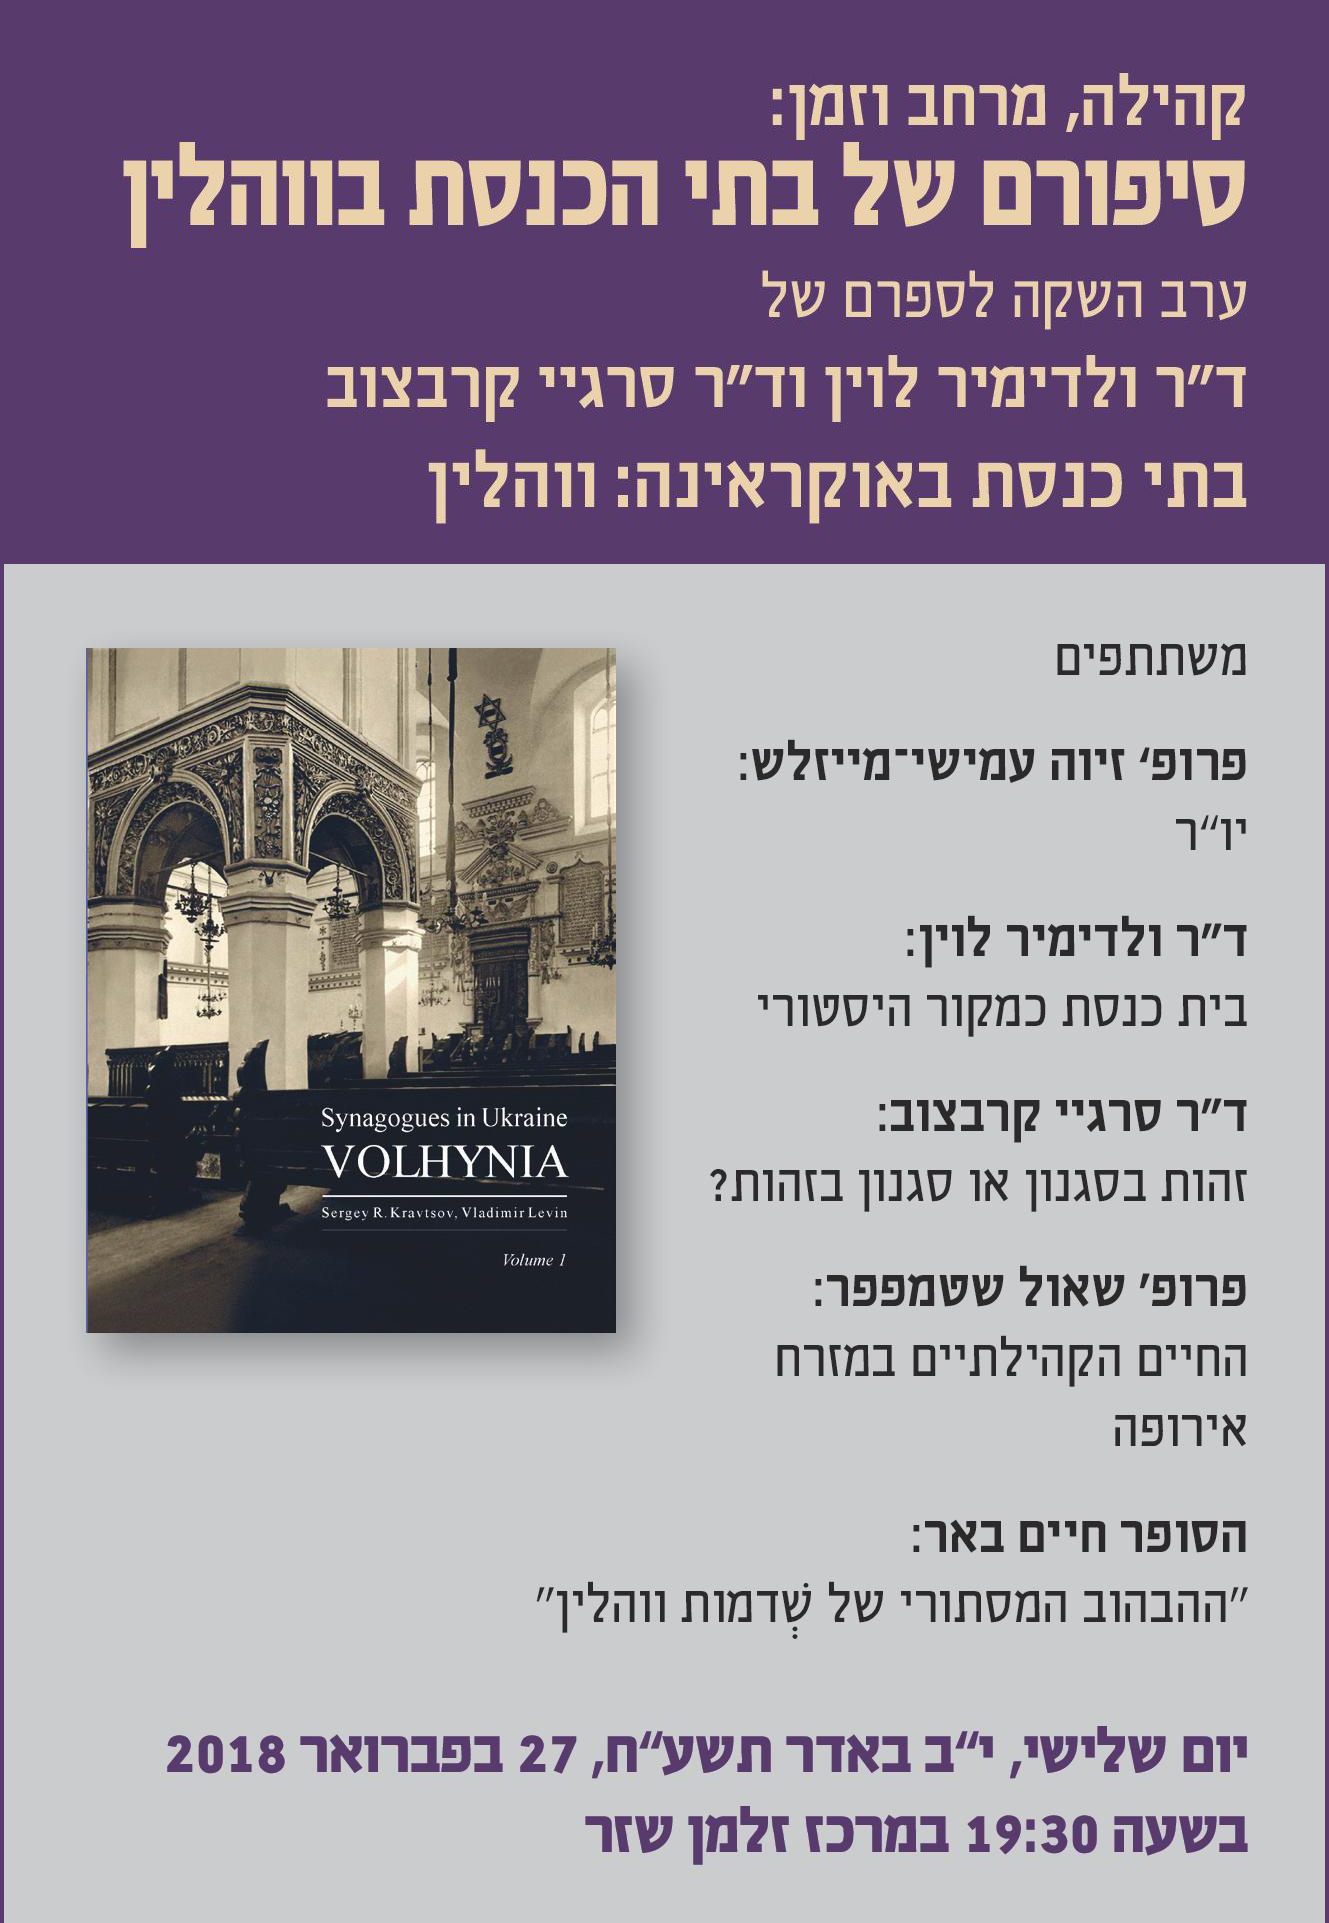 Stories of the Synagogues of Volhynia